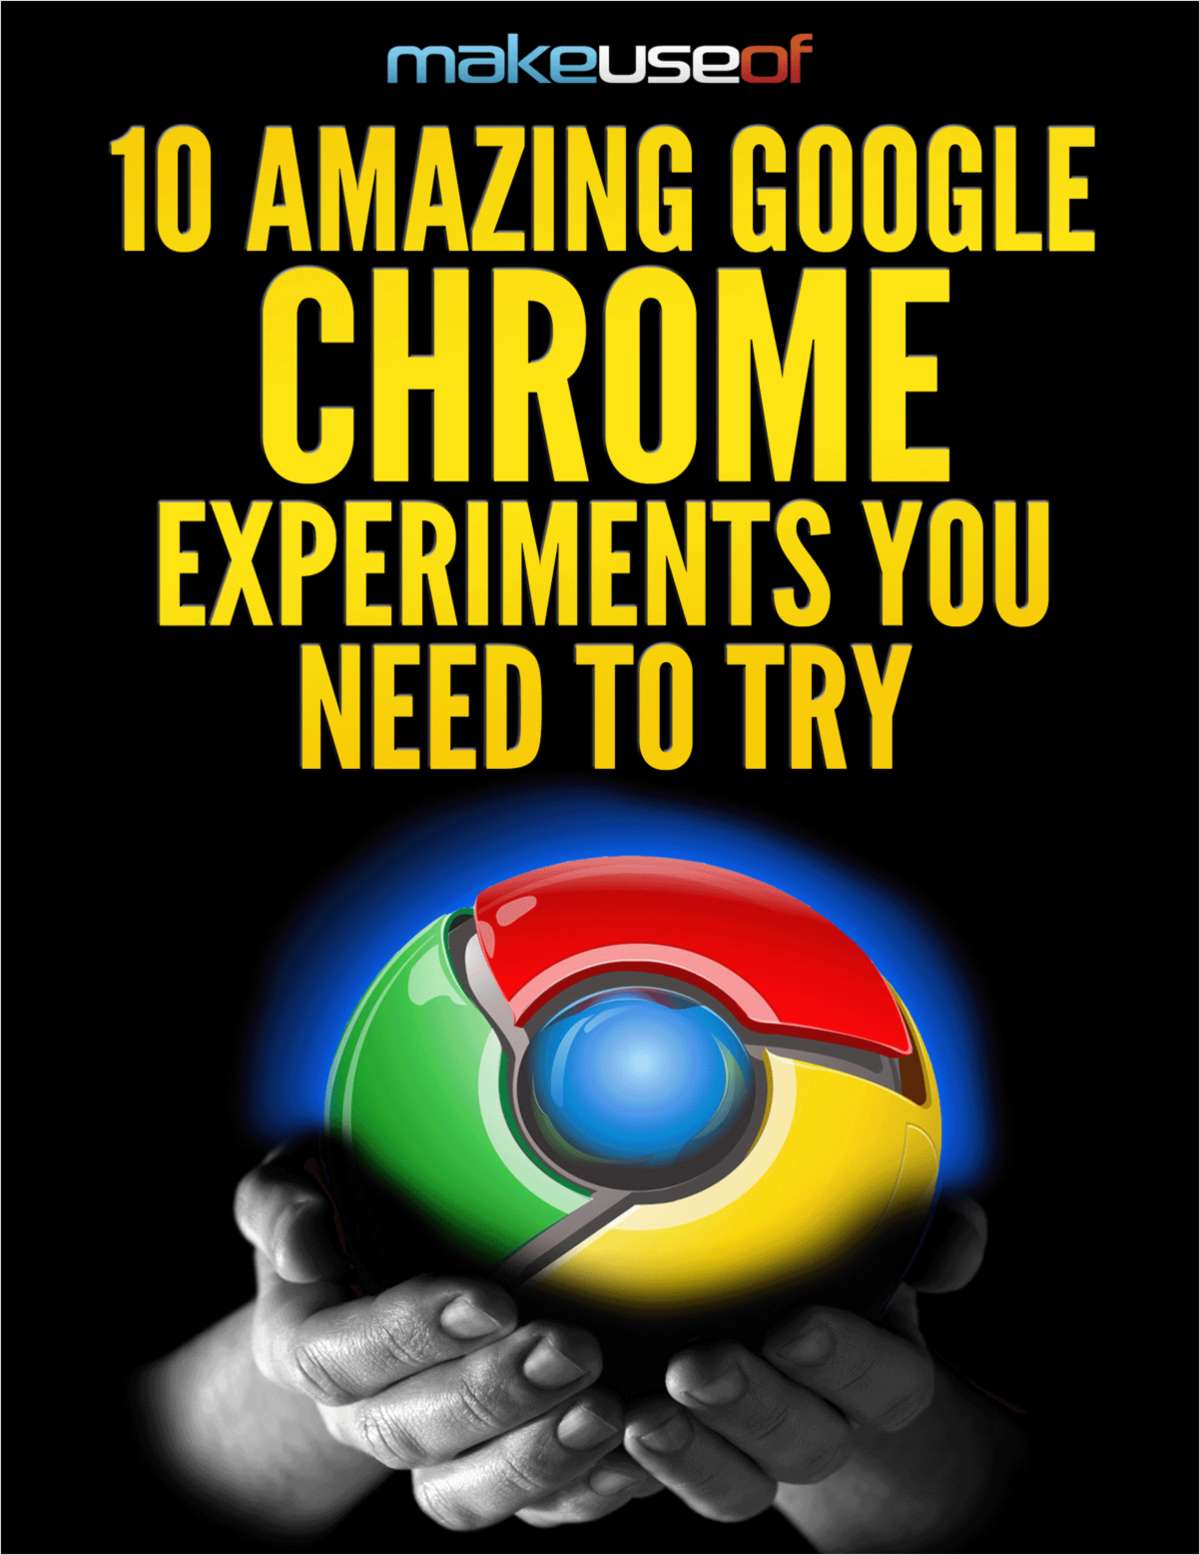 10 Amazing Google Chrome Experiments You Need to Try